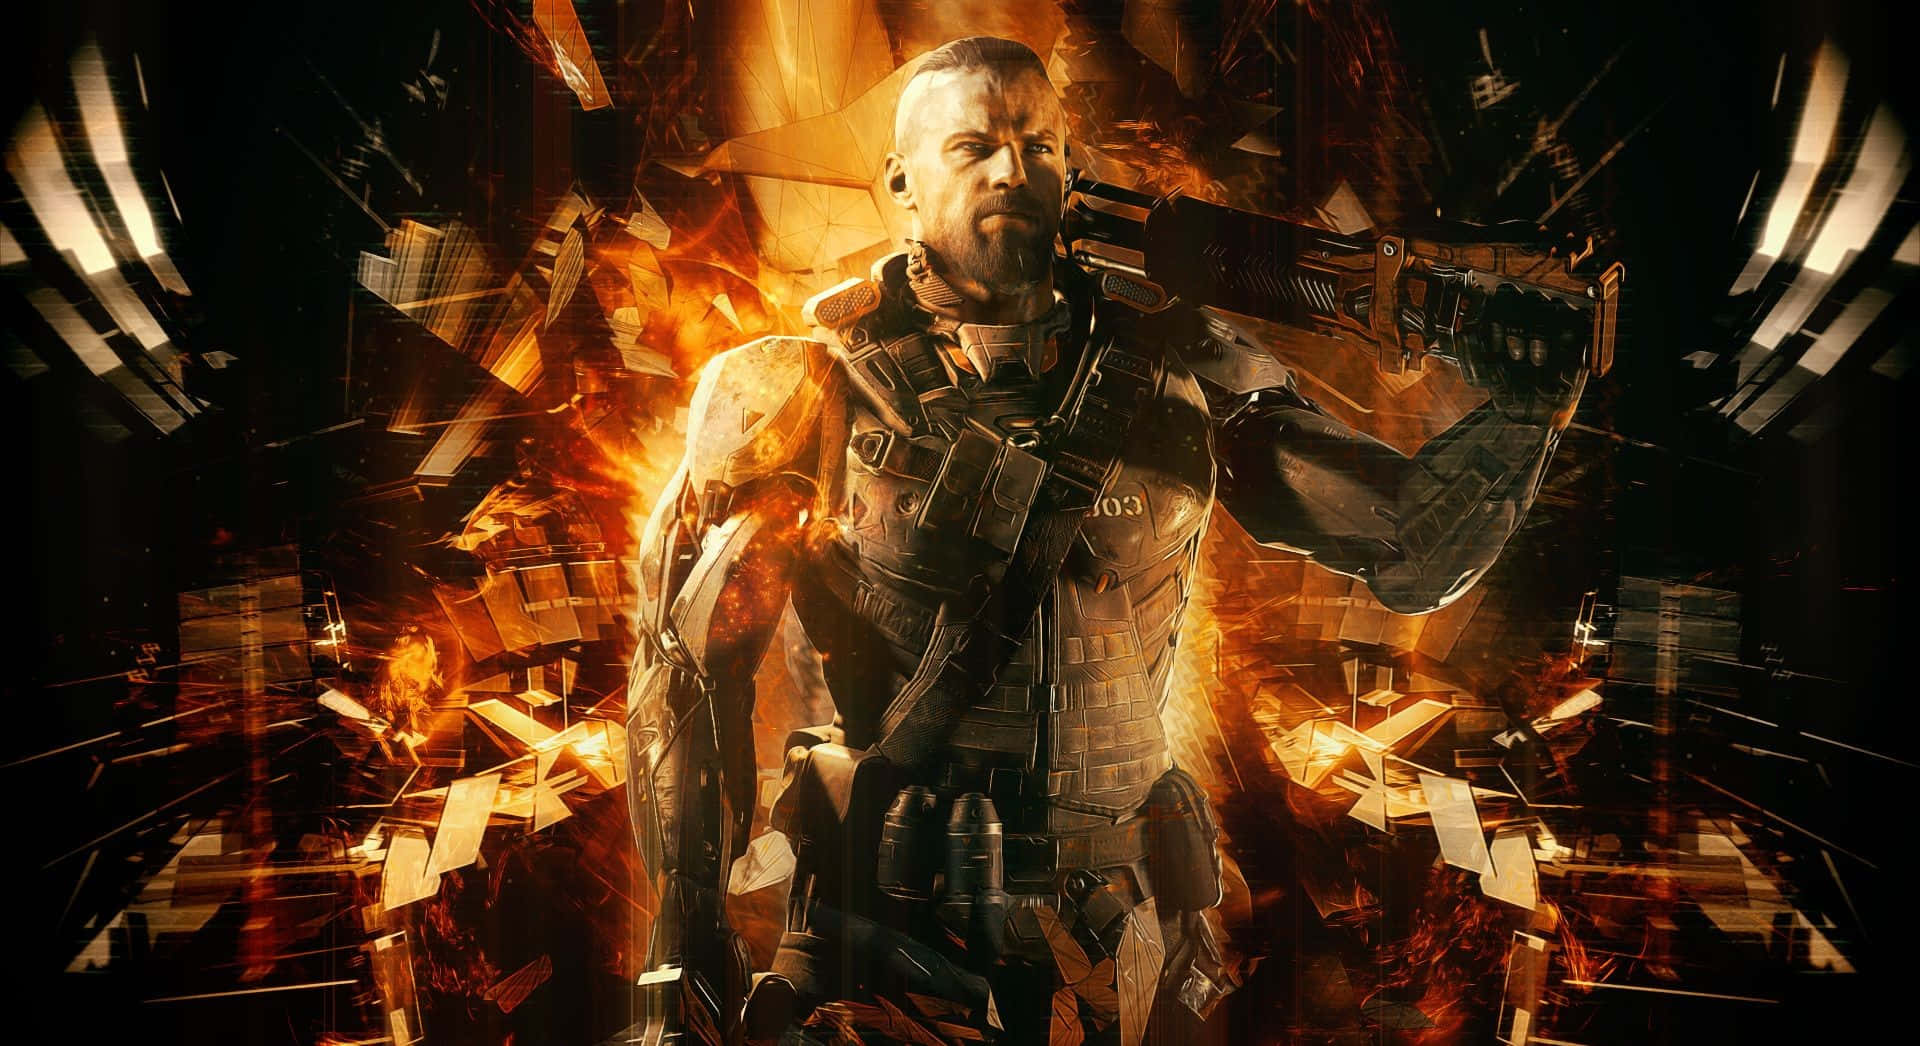 Hand  Call of Duty Black Ops 3 Live Wallpaper  1920x1080  Rare Gallery  HD Live Wallpapers